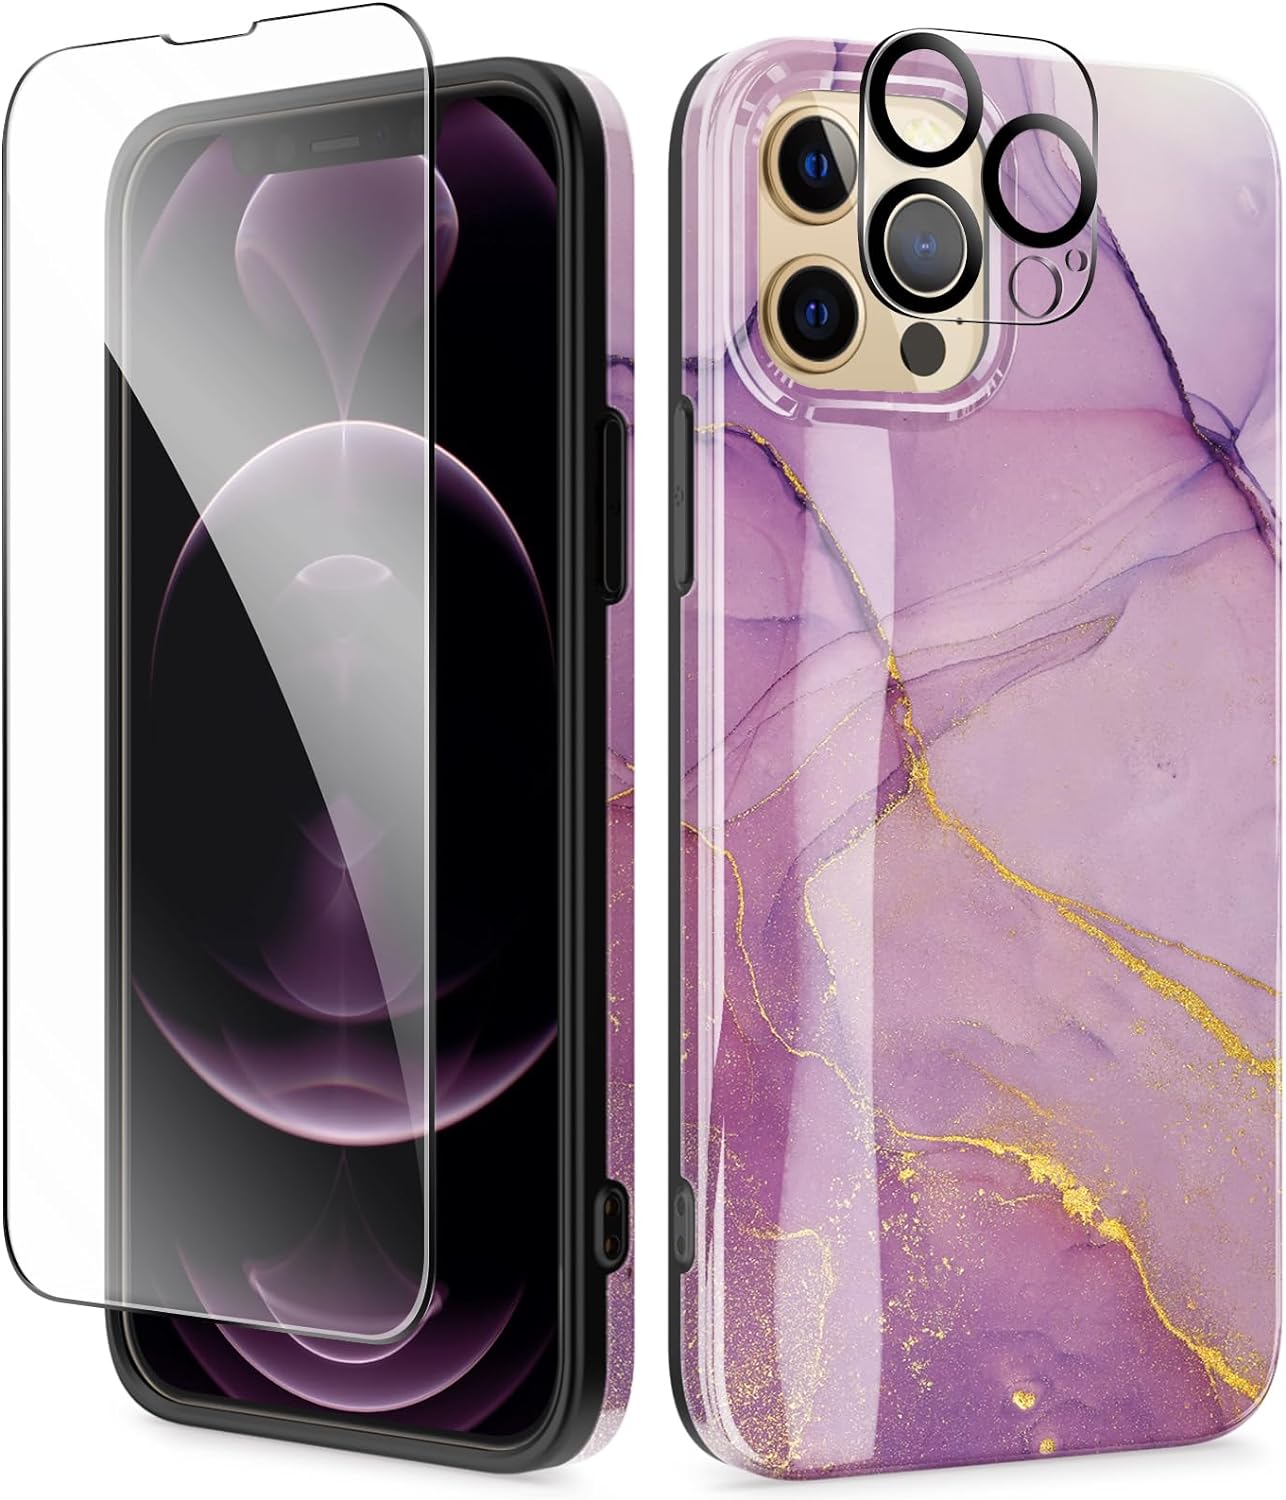 GVIEWIN for iPhone 12 Pro Max Case with Screen Protector & Camera Lens Protector, Marble Ultra Slim Thin Glossy Soft Shockproof TPU Stylish Flexible Protective Cover 6.7 Inch 2020 (Romantic Purple)